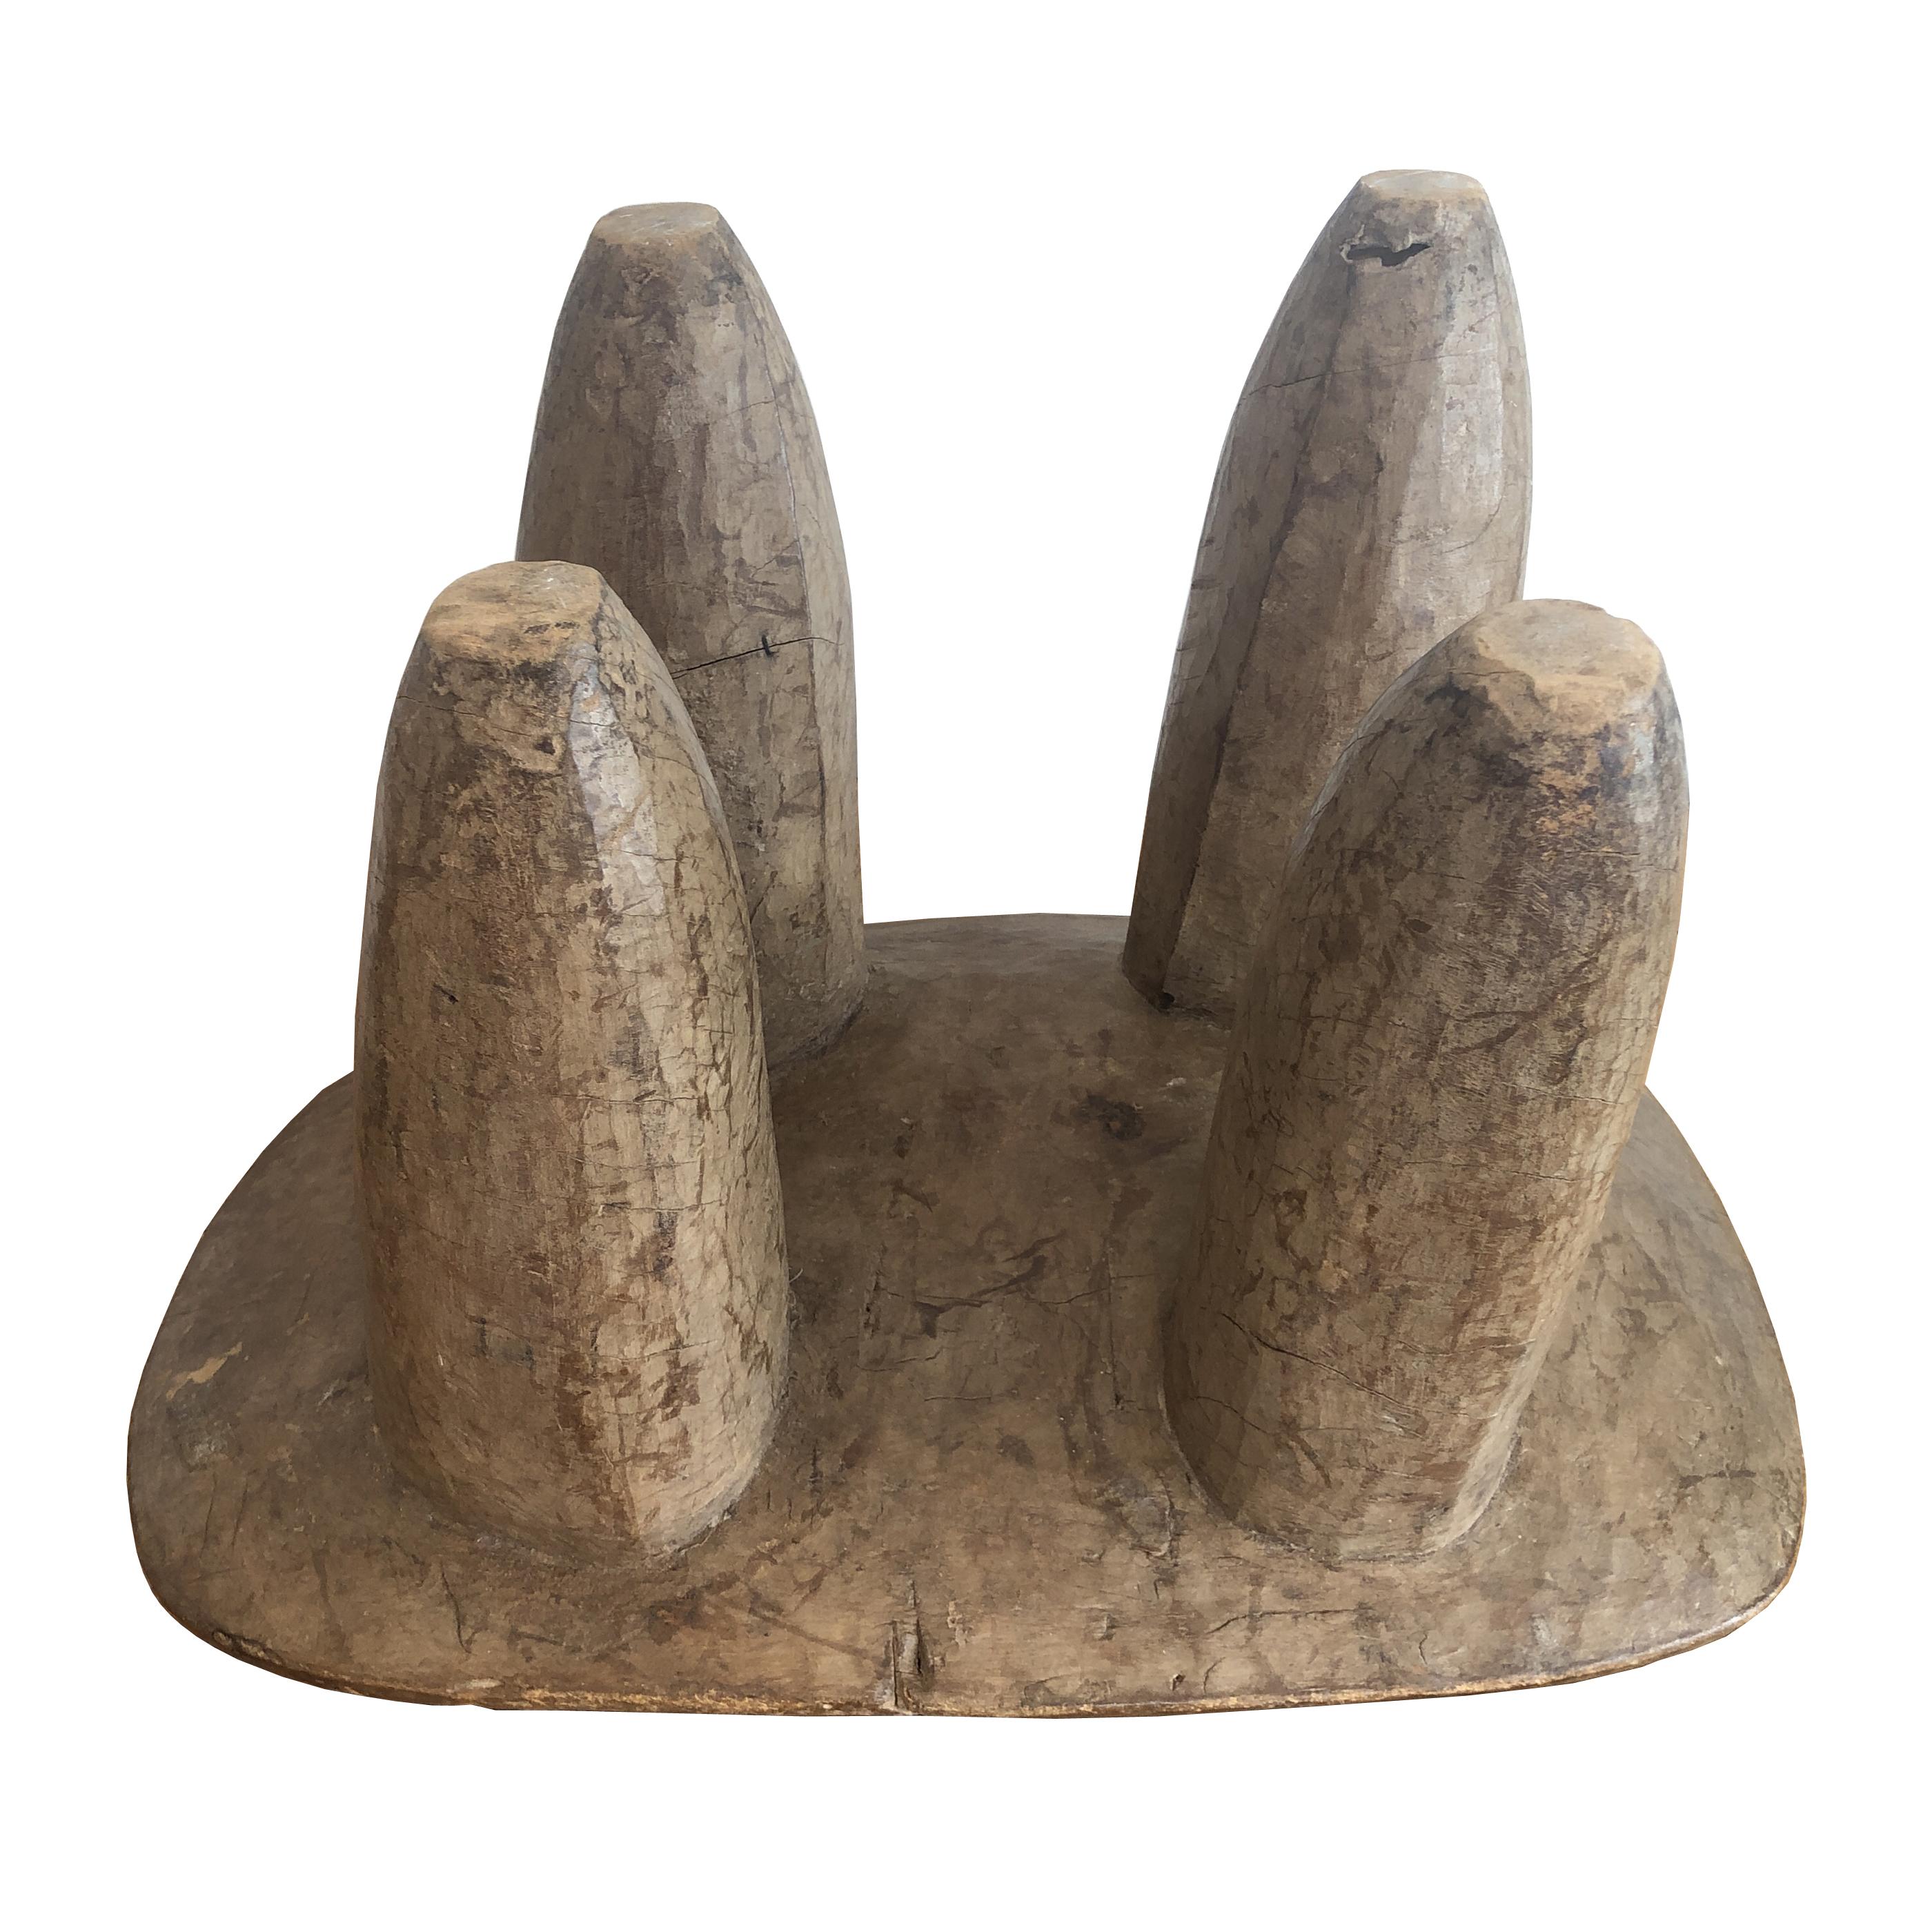 Hand-Carved Four-Legged Tribal Stool of the Senufo People, Ivory Coast of Africa